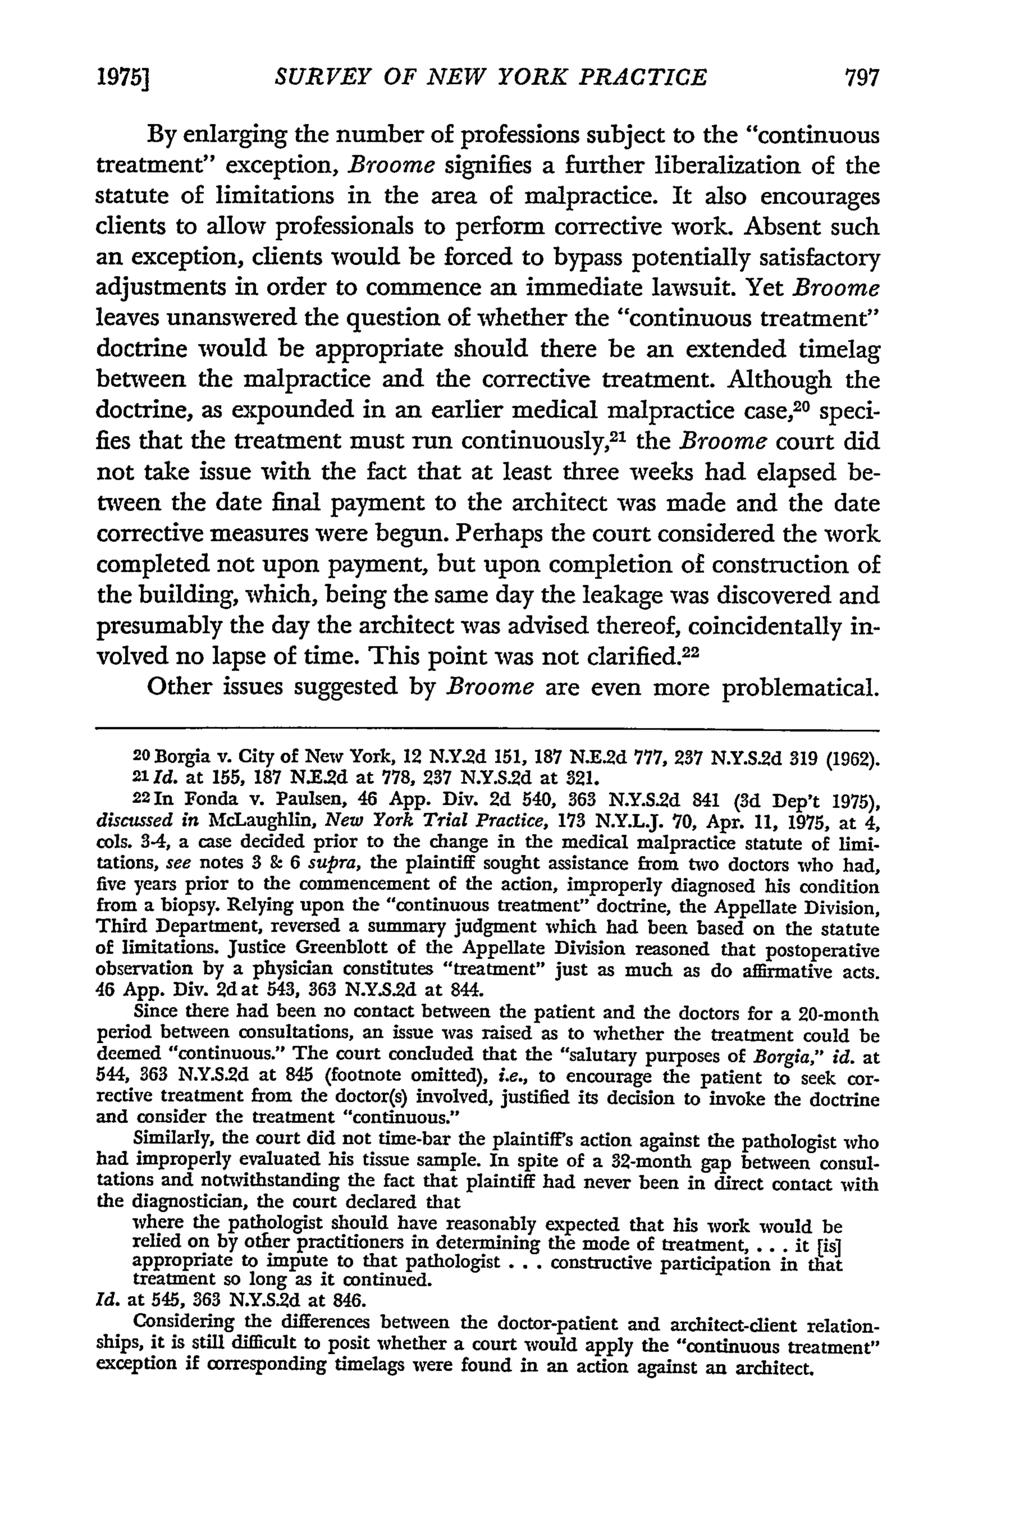 1975] SURVEY OF NEW YORK PRACTICE By enlarging the number of professions subject to the "continuous treatment" exception, Broome signifies a further liberalization of the statute of limitations in